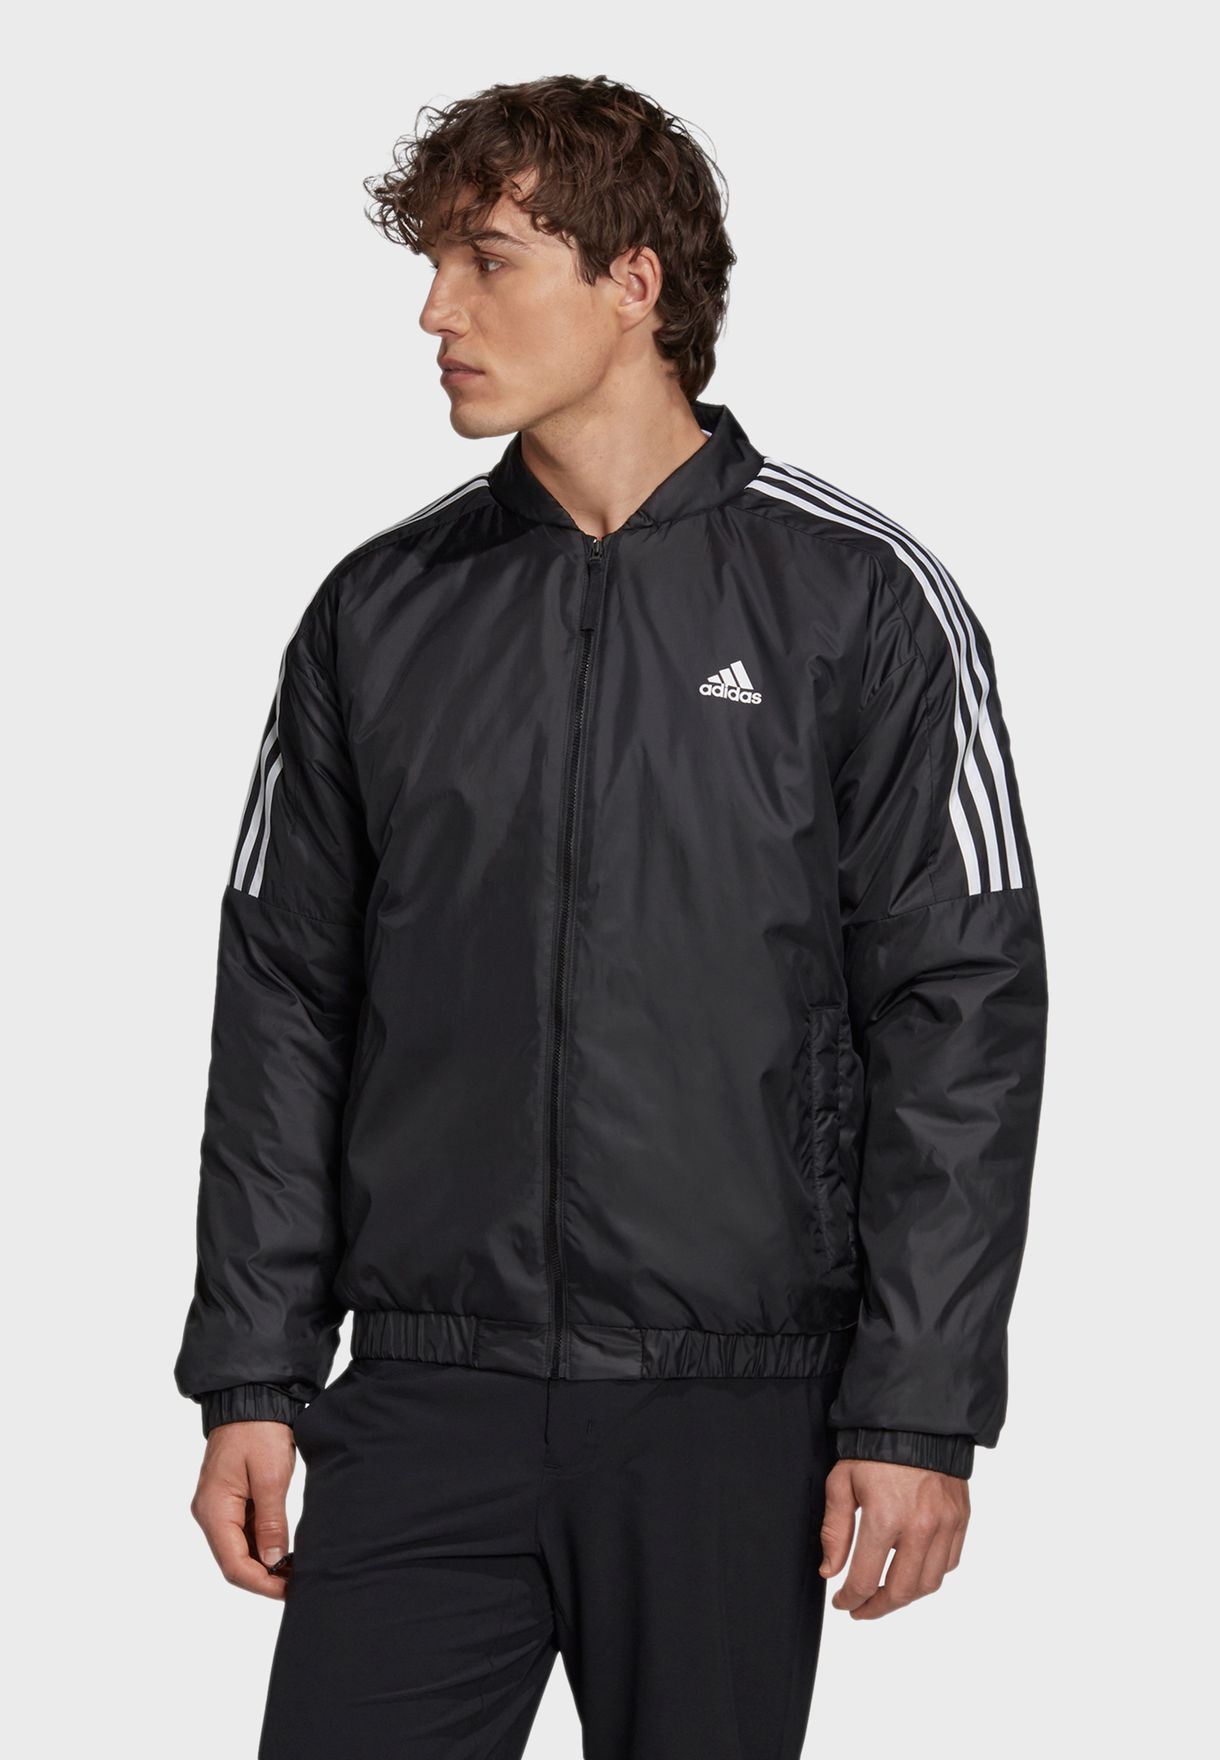 Buy > adidas insulated > in stock